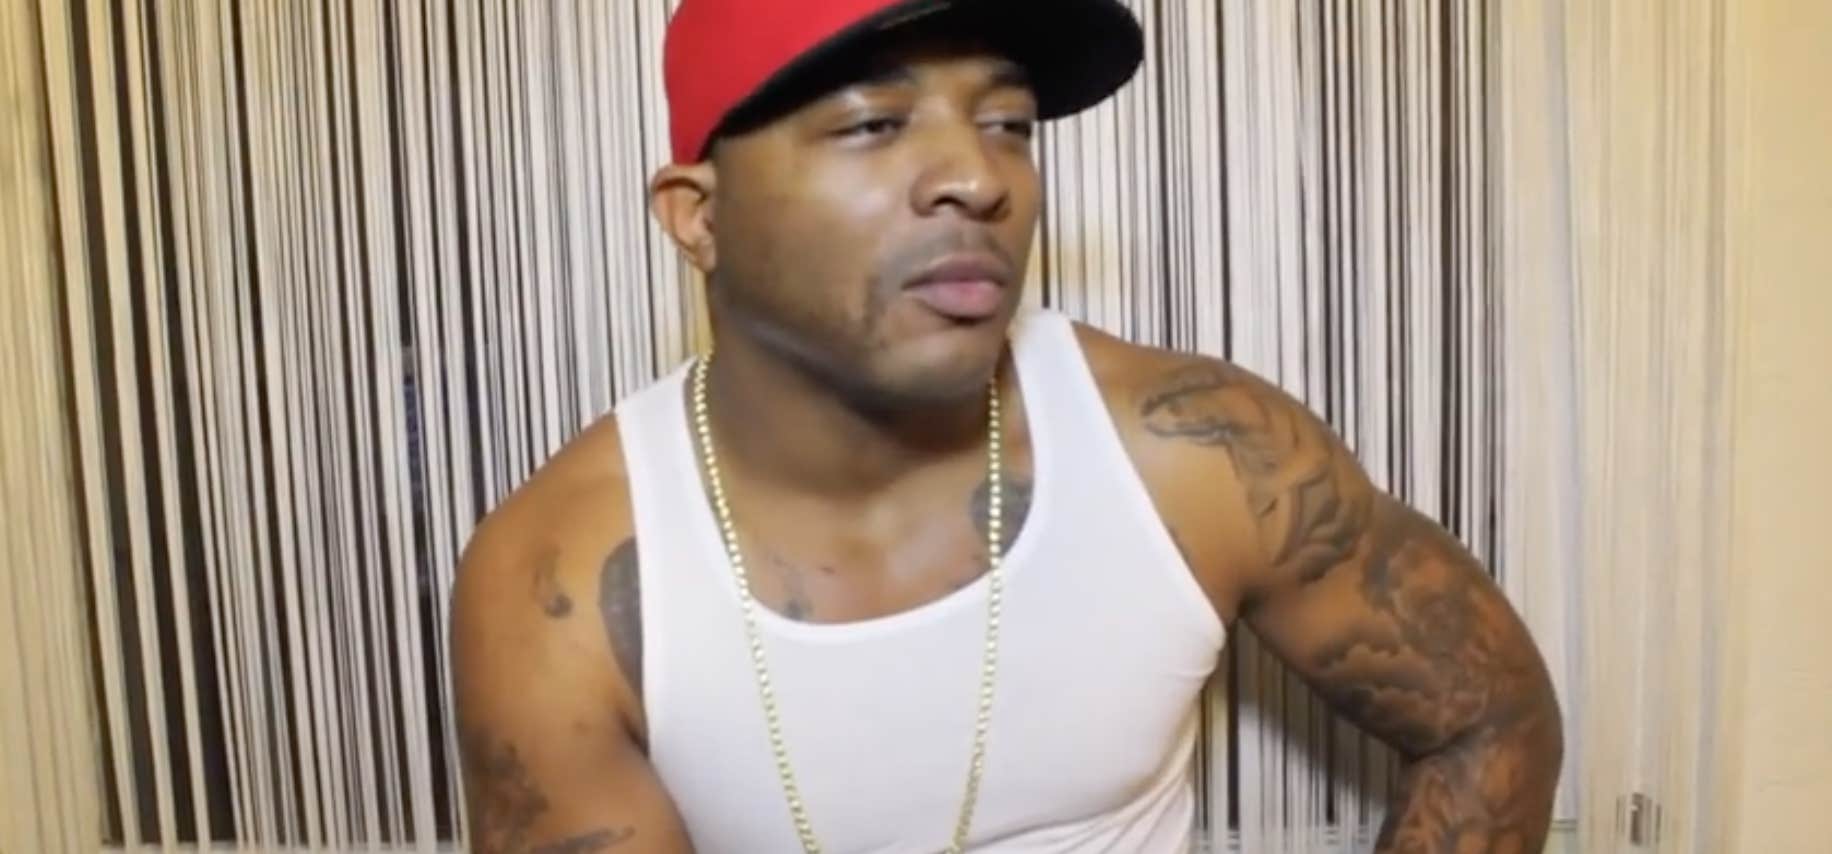 Who Is 40 Glocc? New Details On Rapper Taking Plea Deal In Prostitution Case